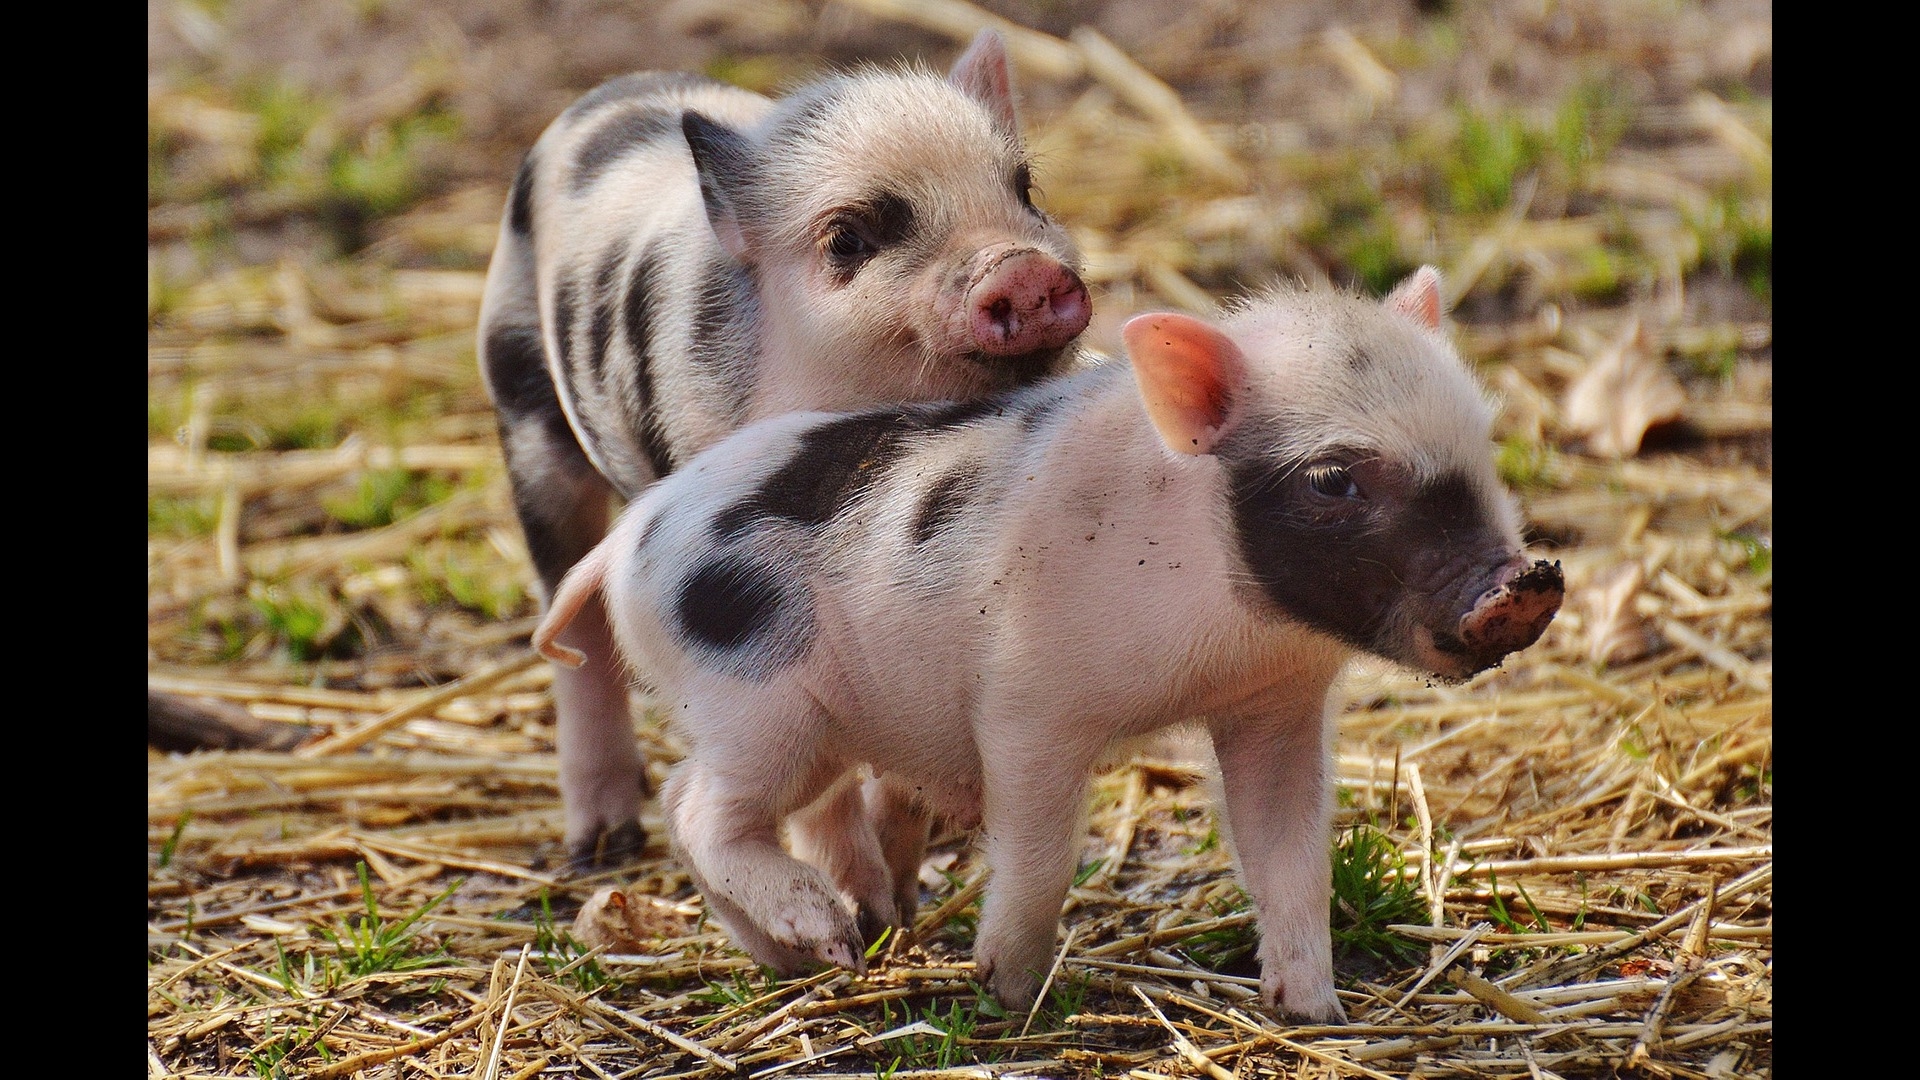 piglets playing